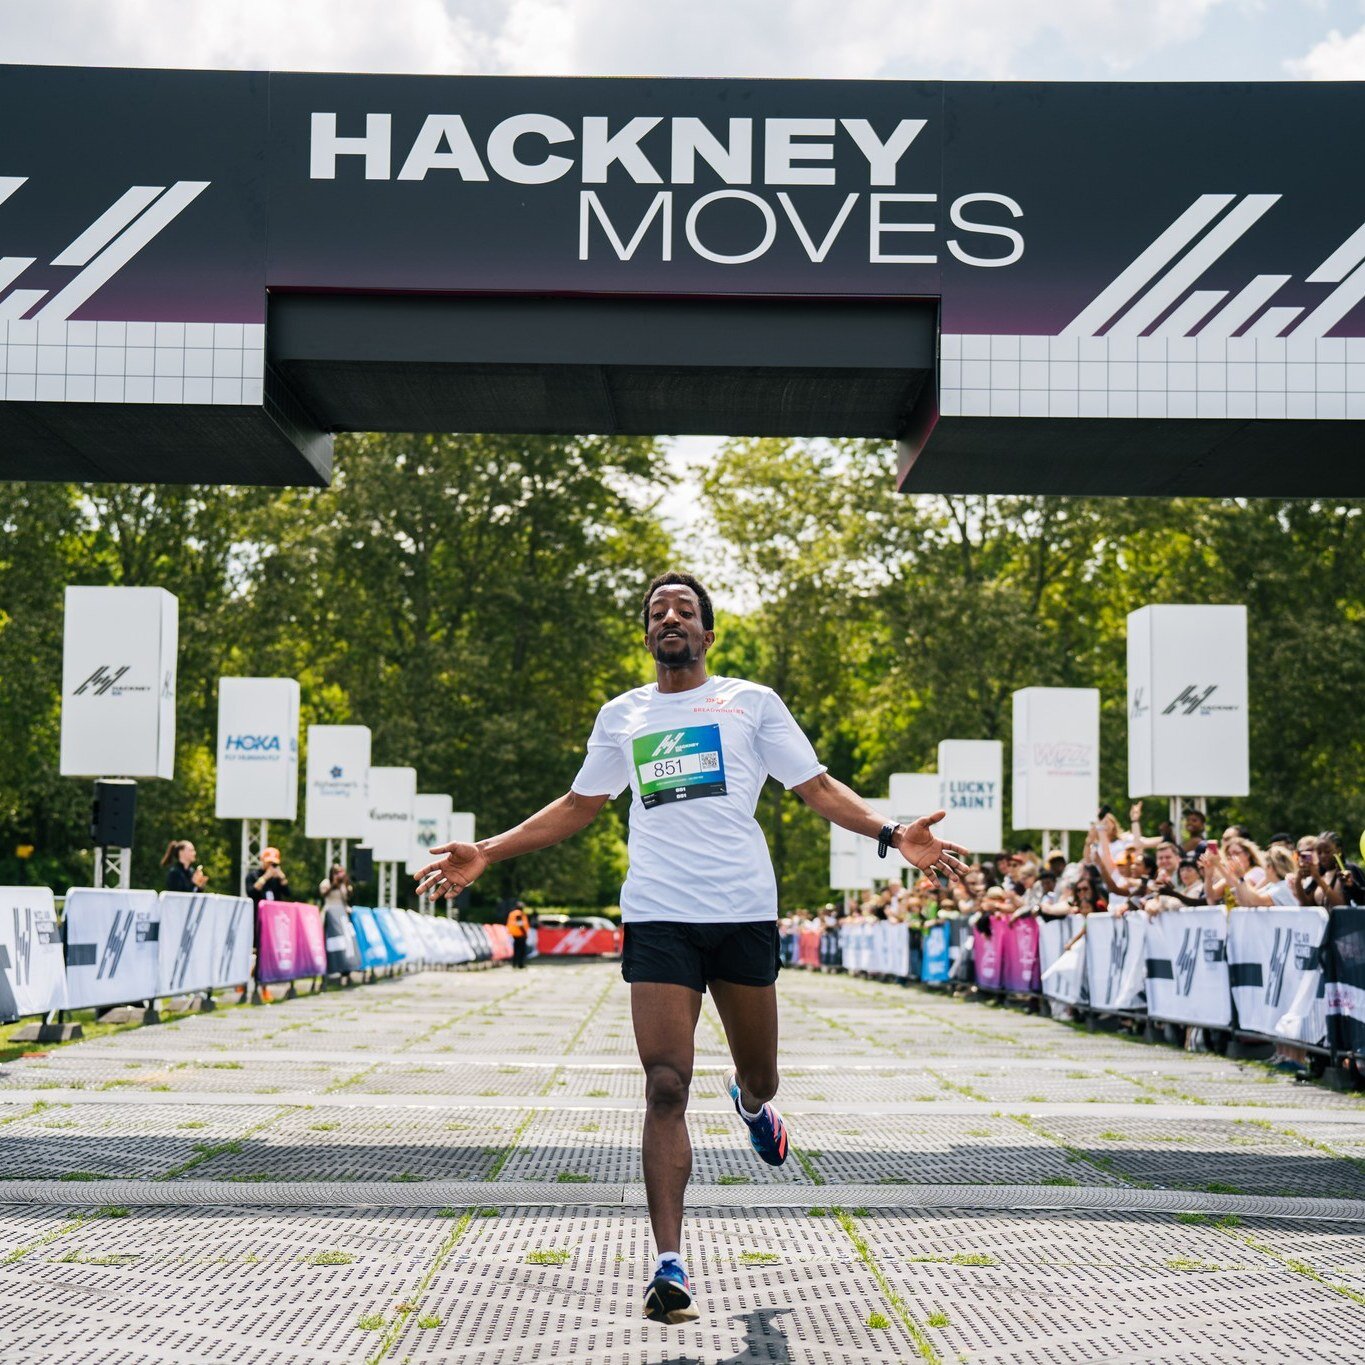 DAY 1 COMPLETE ✅

What a day it has been! From our schools challenge, community 5k's and all the amazing fitness classes in the event village, it's safe to say Hackney definitely moved 🕺

We can't to see you all again tomorrow for the Wizz Air Hackn